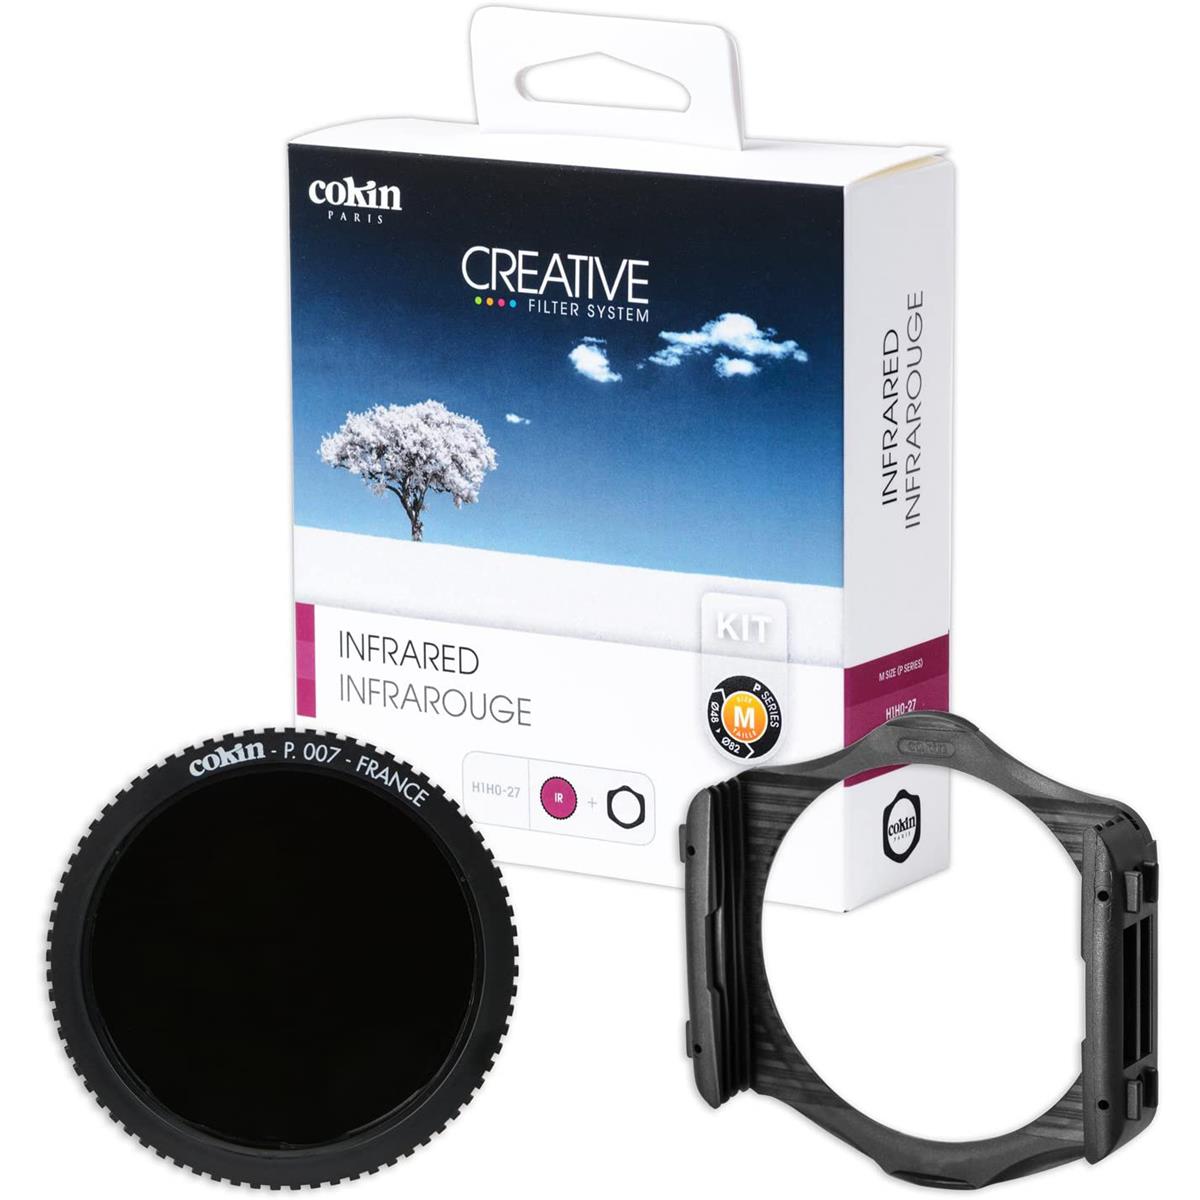 Image of Cokin Creative Infrared Filter Kit with P Series Filter Holder